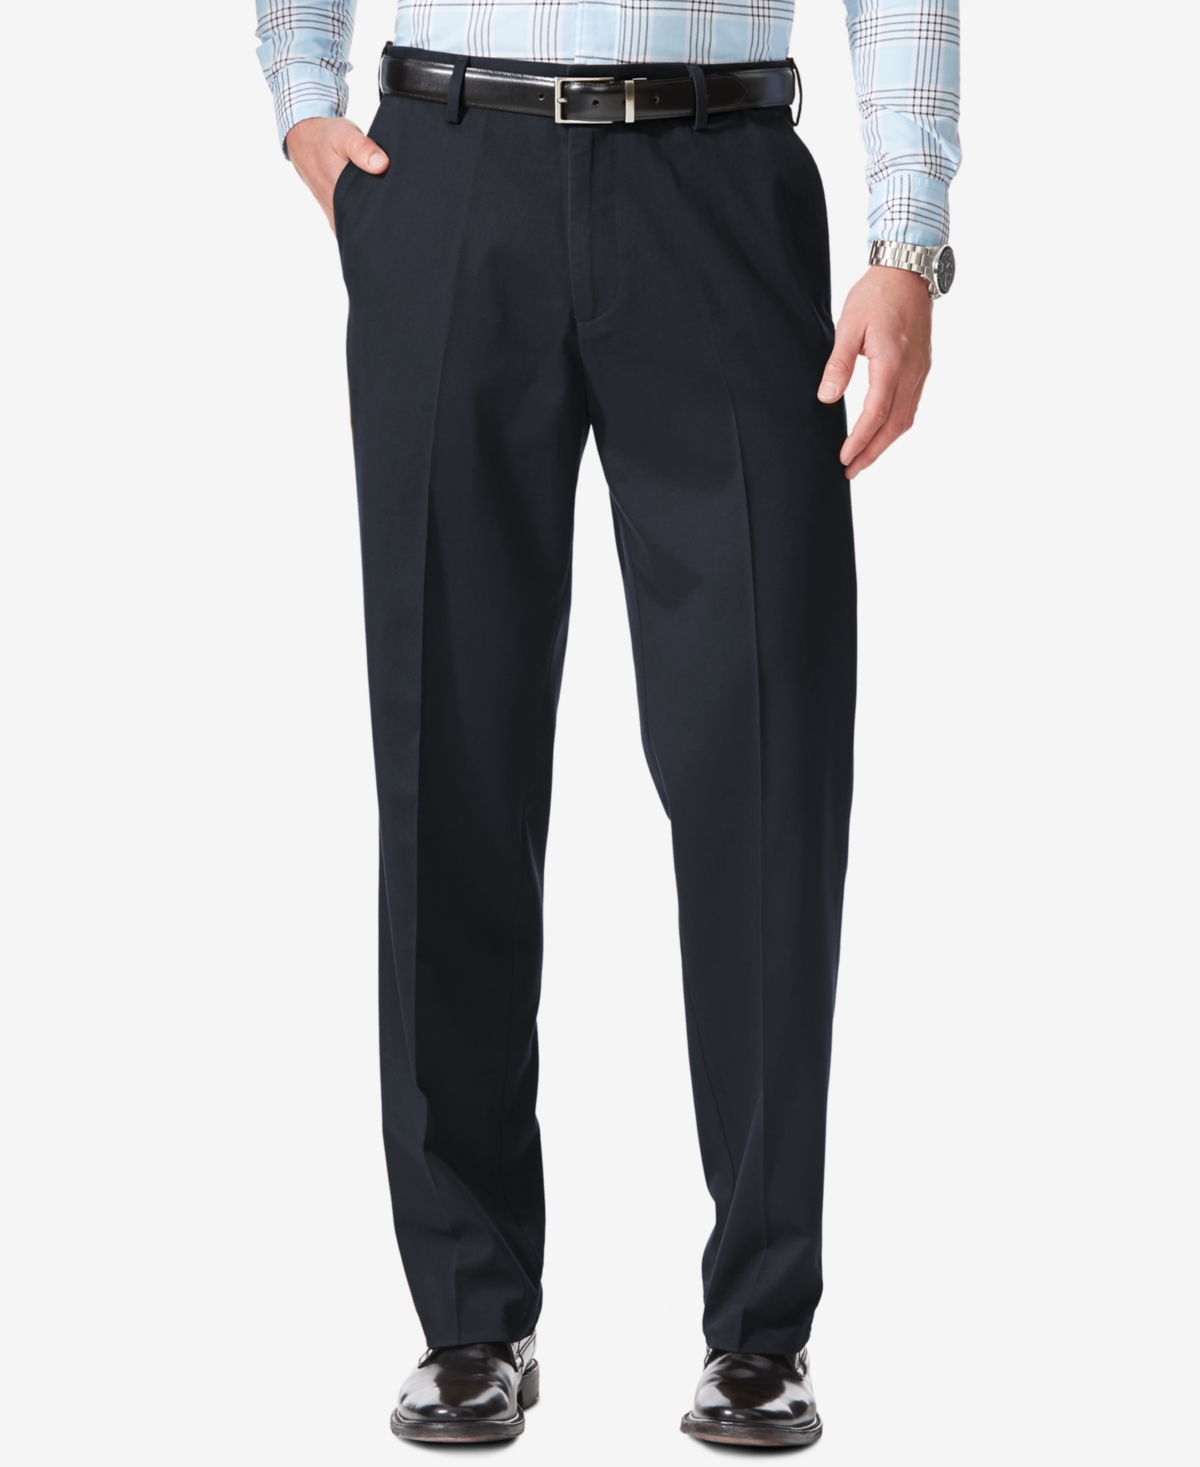 Men's Comfort Relaxed Fit Khaki Stretch Pants - Navy